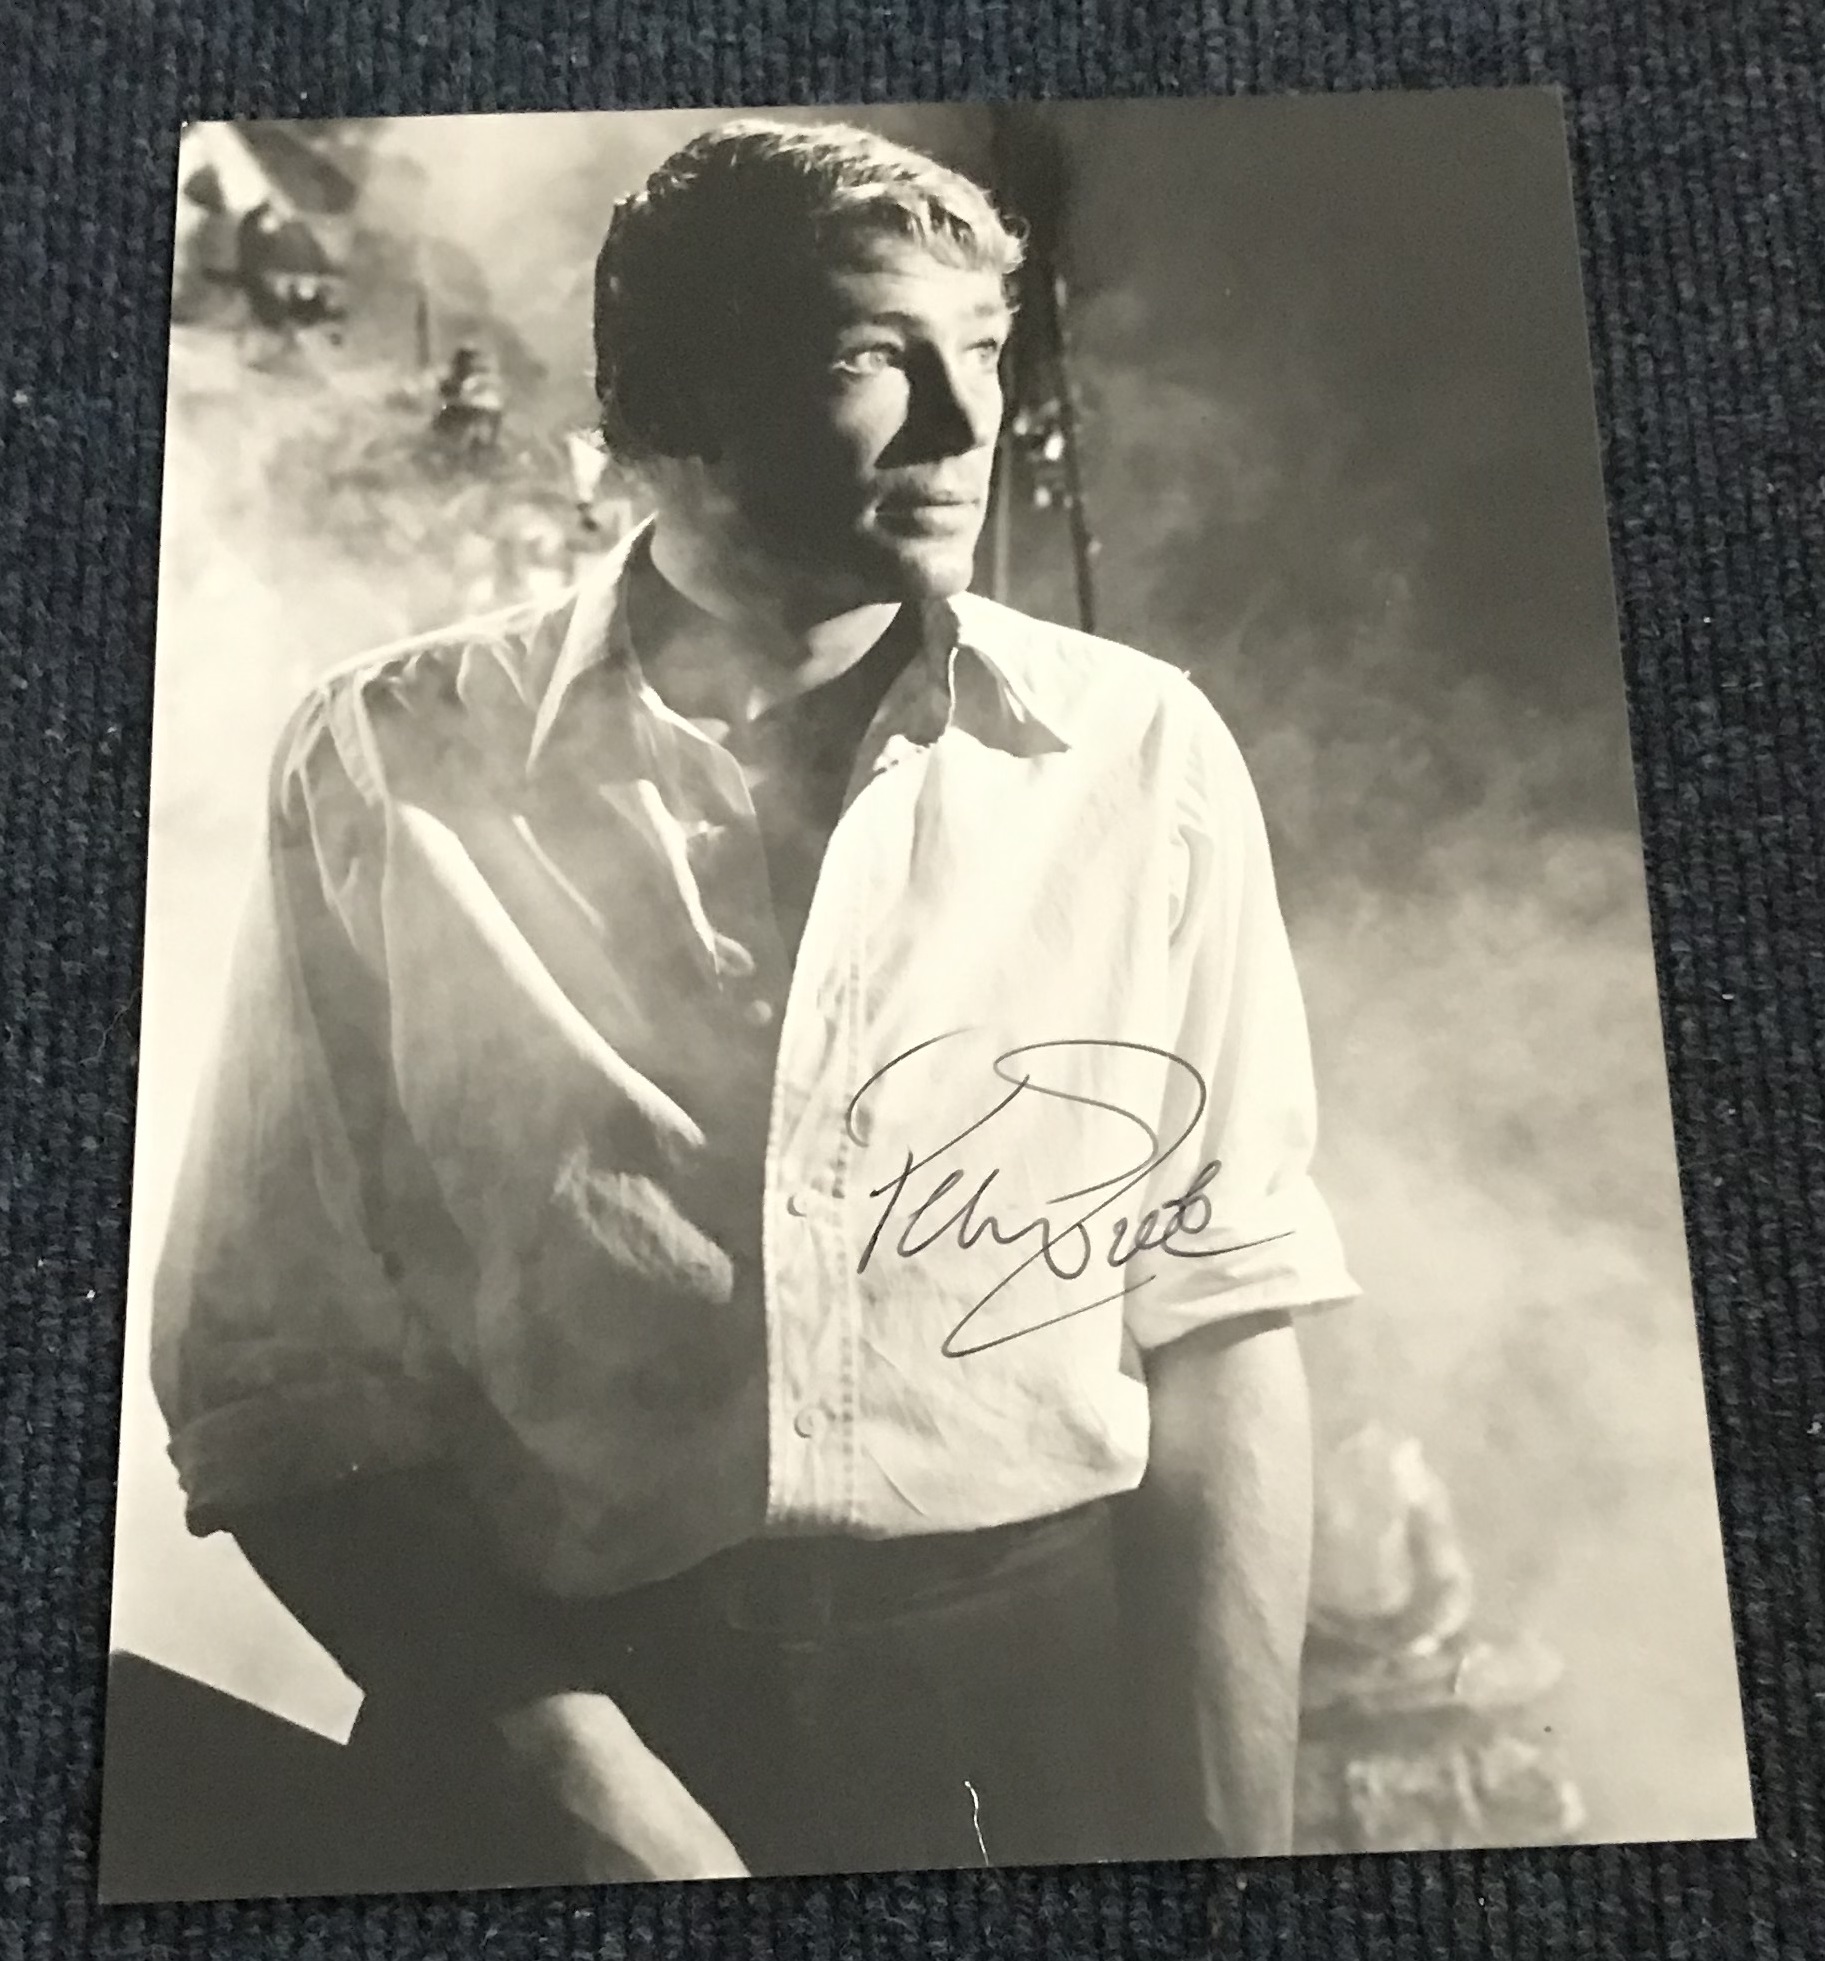 Peter O'Toole signed 10 x 8 inch b/w photo in early years.